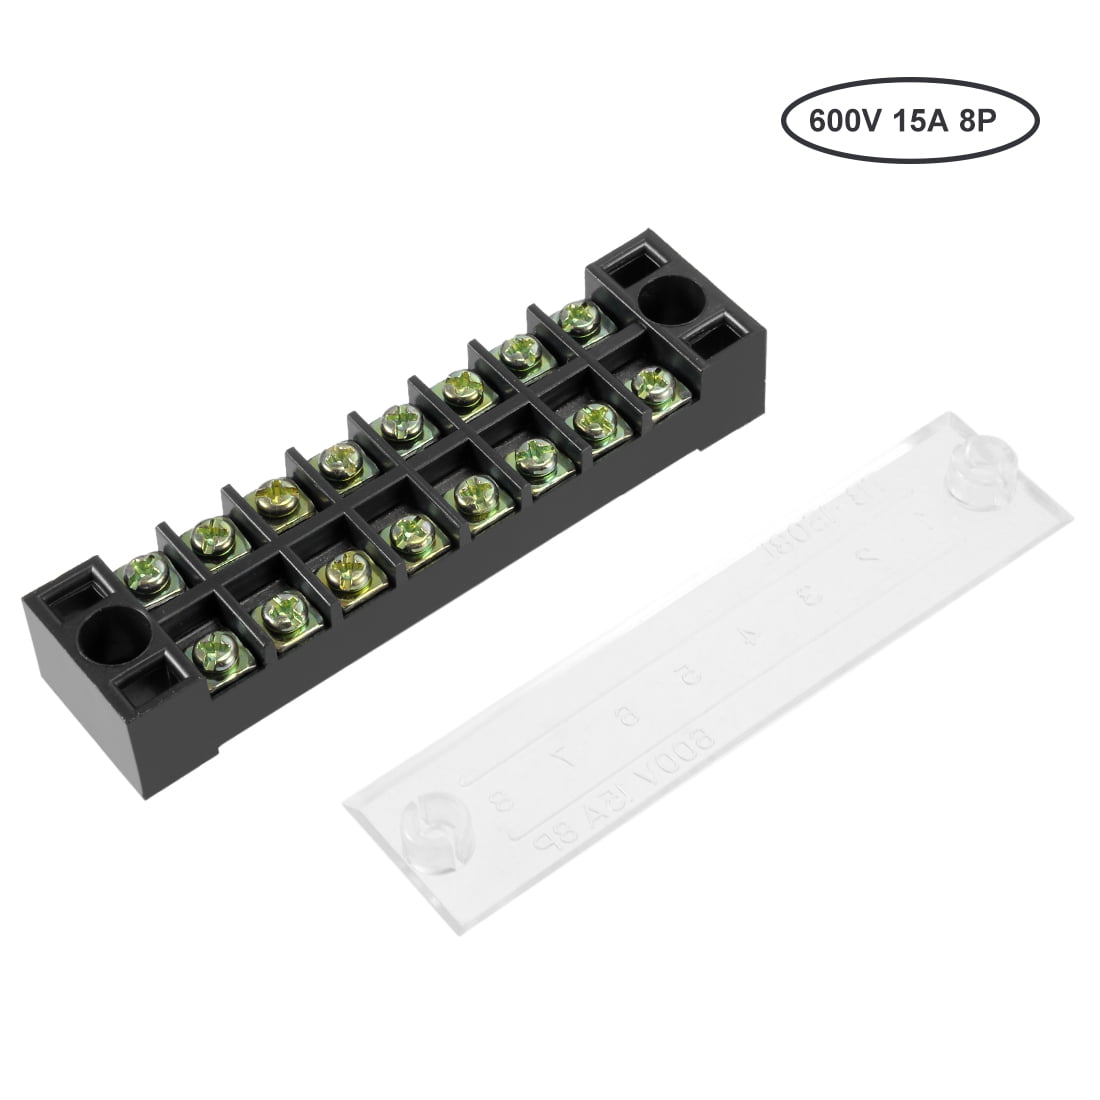 2pcs 600V 15A 2 Rows 8 Positions 8P Covered Screw Terminal Barrier Strip Block